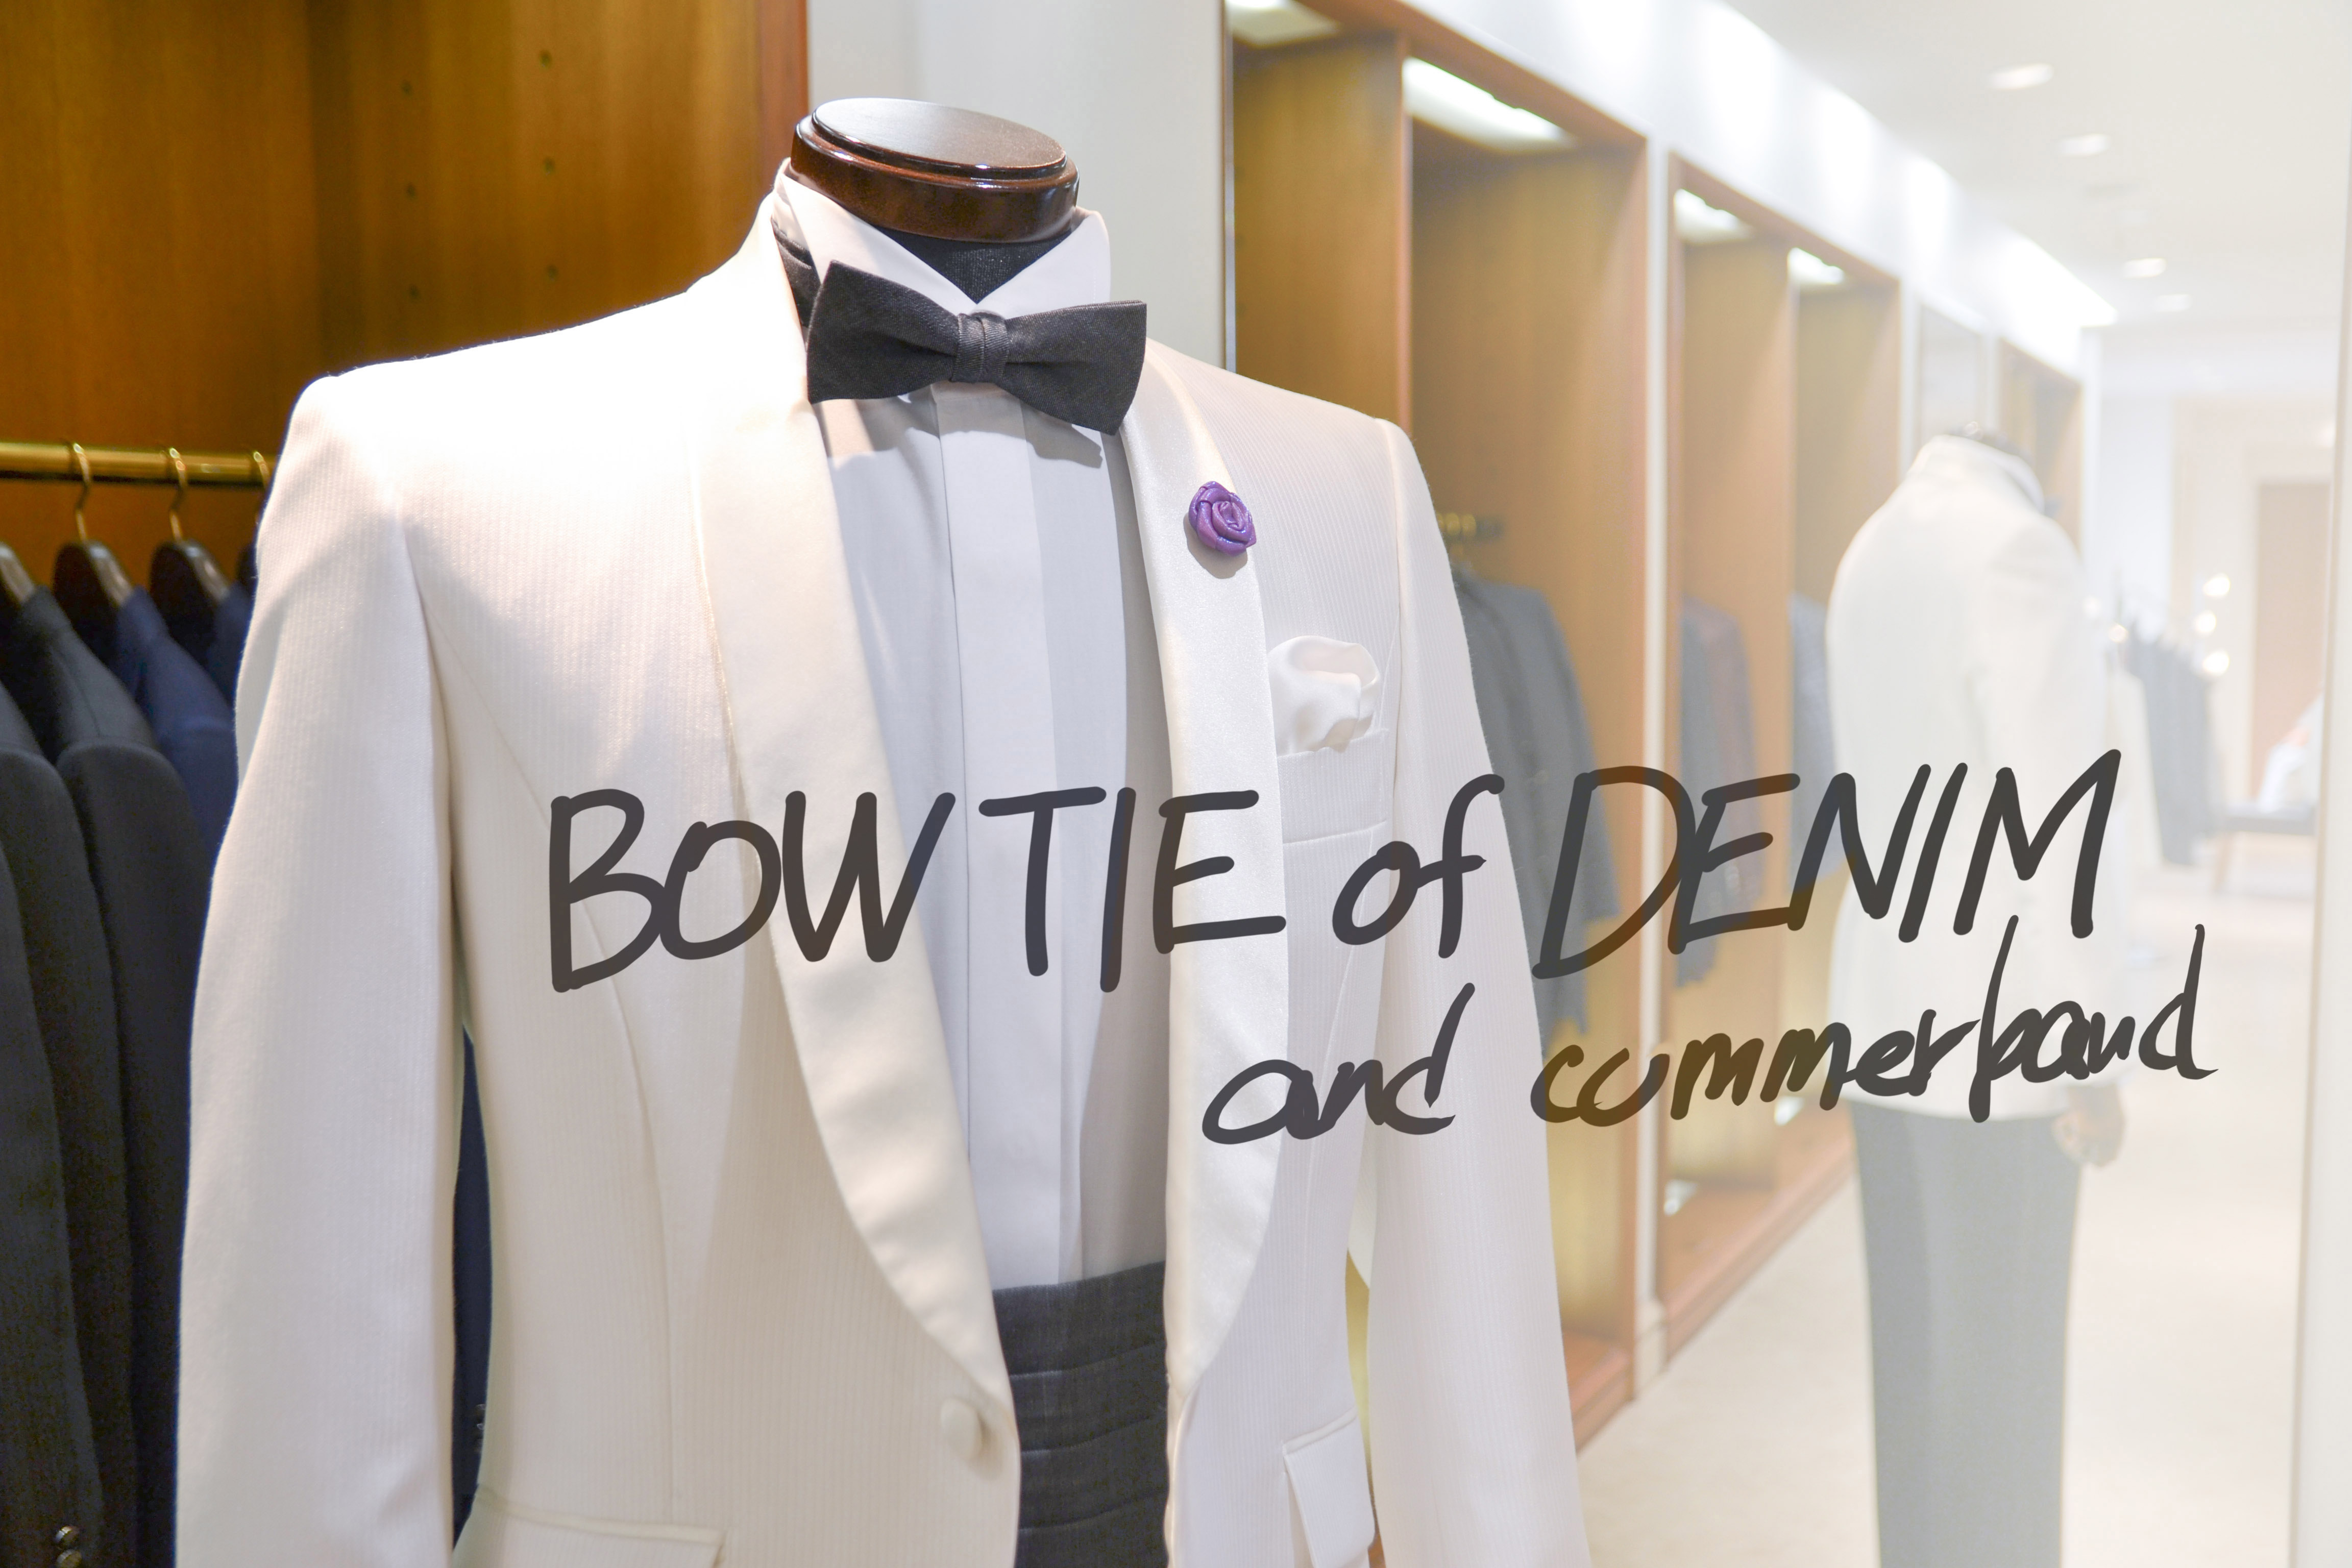 BOW TIE of DENIM and COMMERBAND